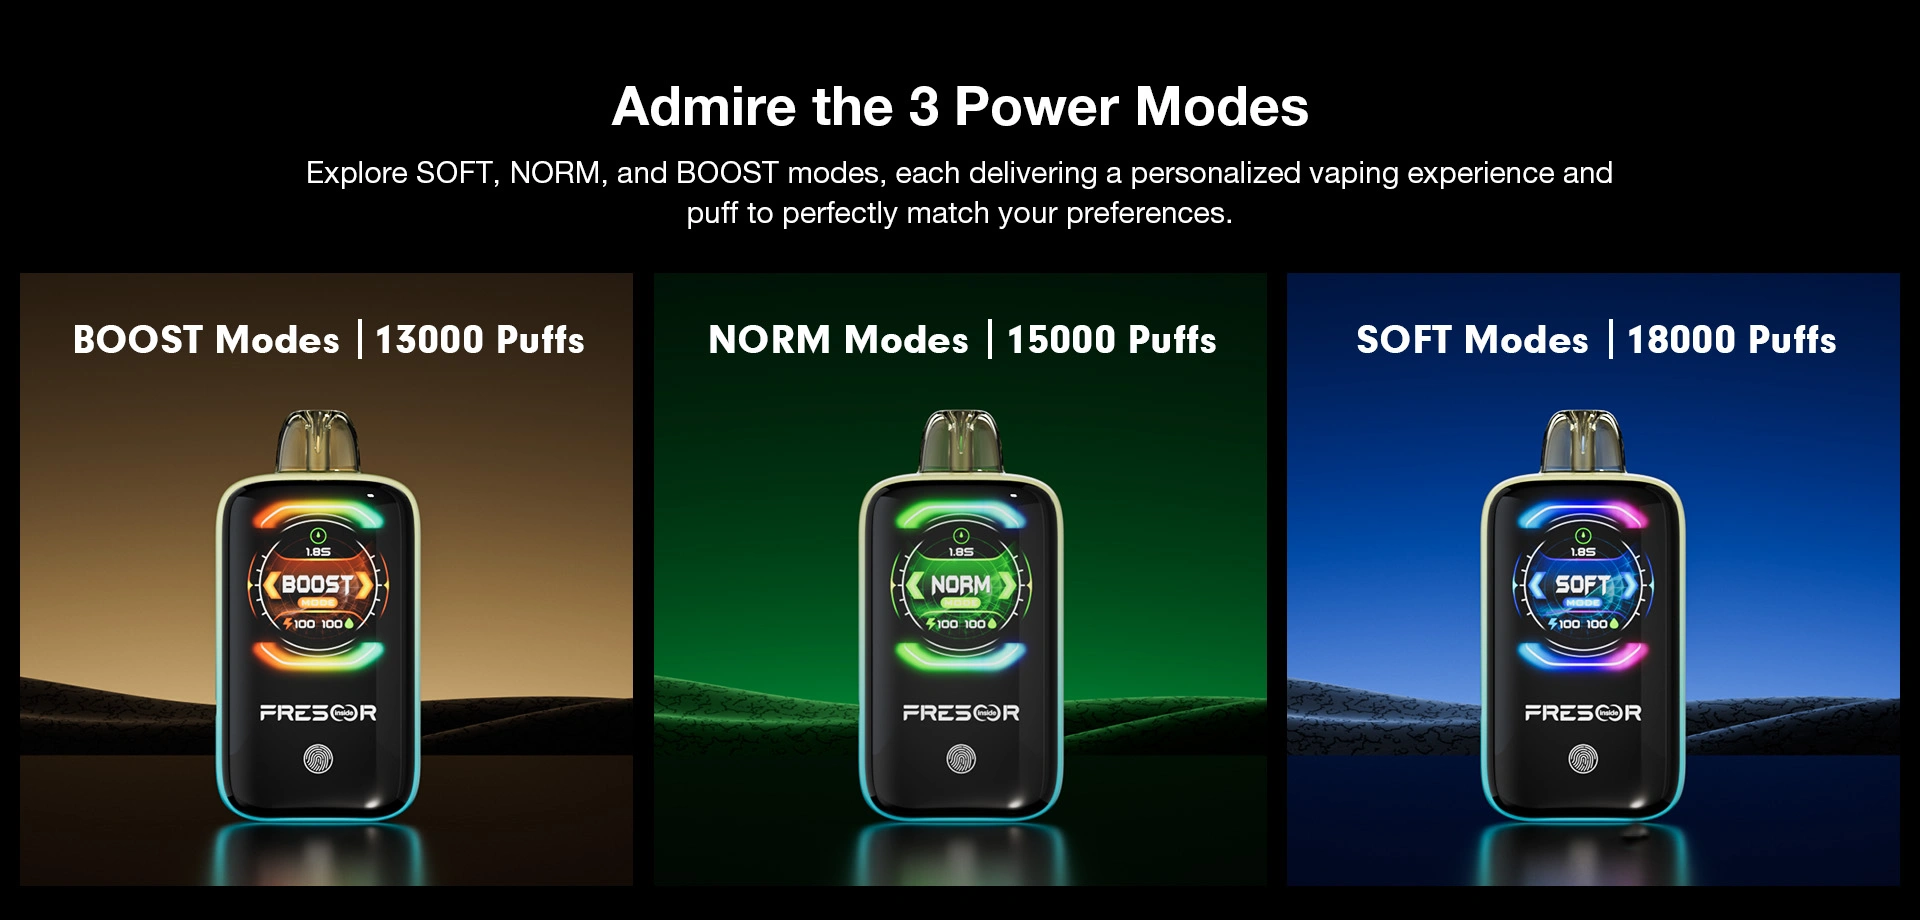 Admire the 3 Power Modes  Explore SOFT, NORM, and BOOST modes, each delivering a personalized vaping experience and puff to perfectly match your preferences.  BOOST Modes 13000 Puffs NORM Modes 15000 Puffs SOFT Modes 18000 Puffs